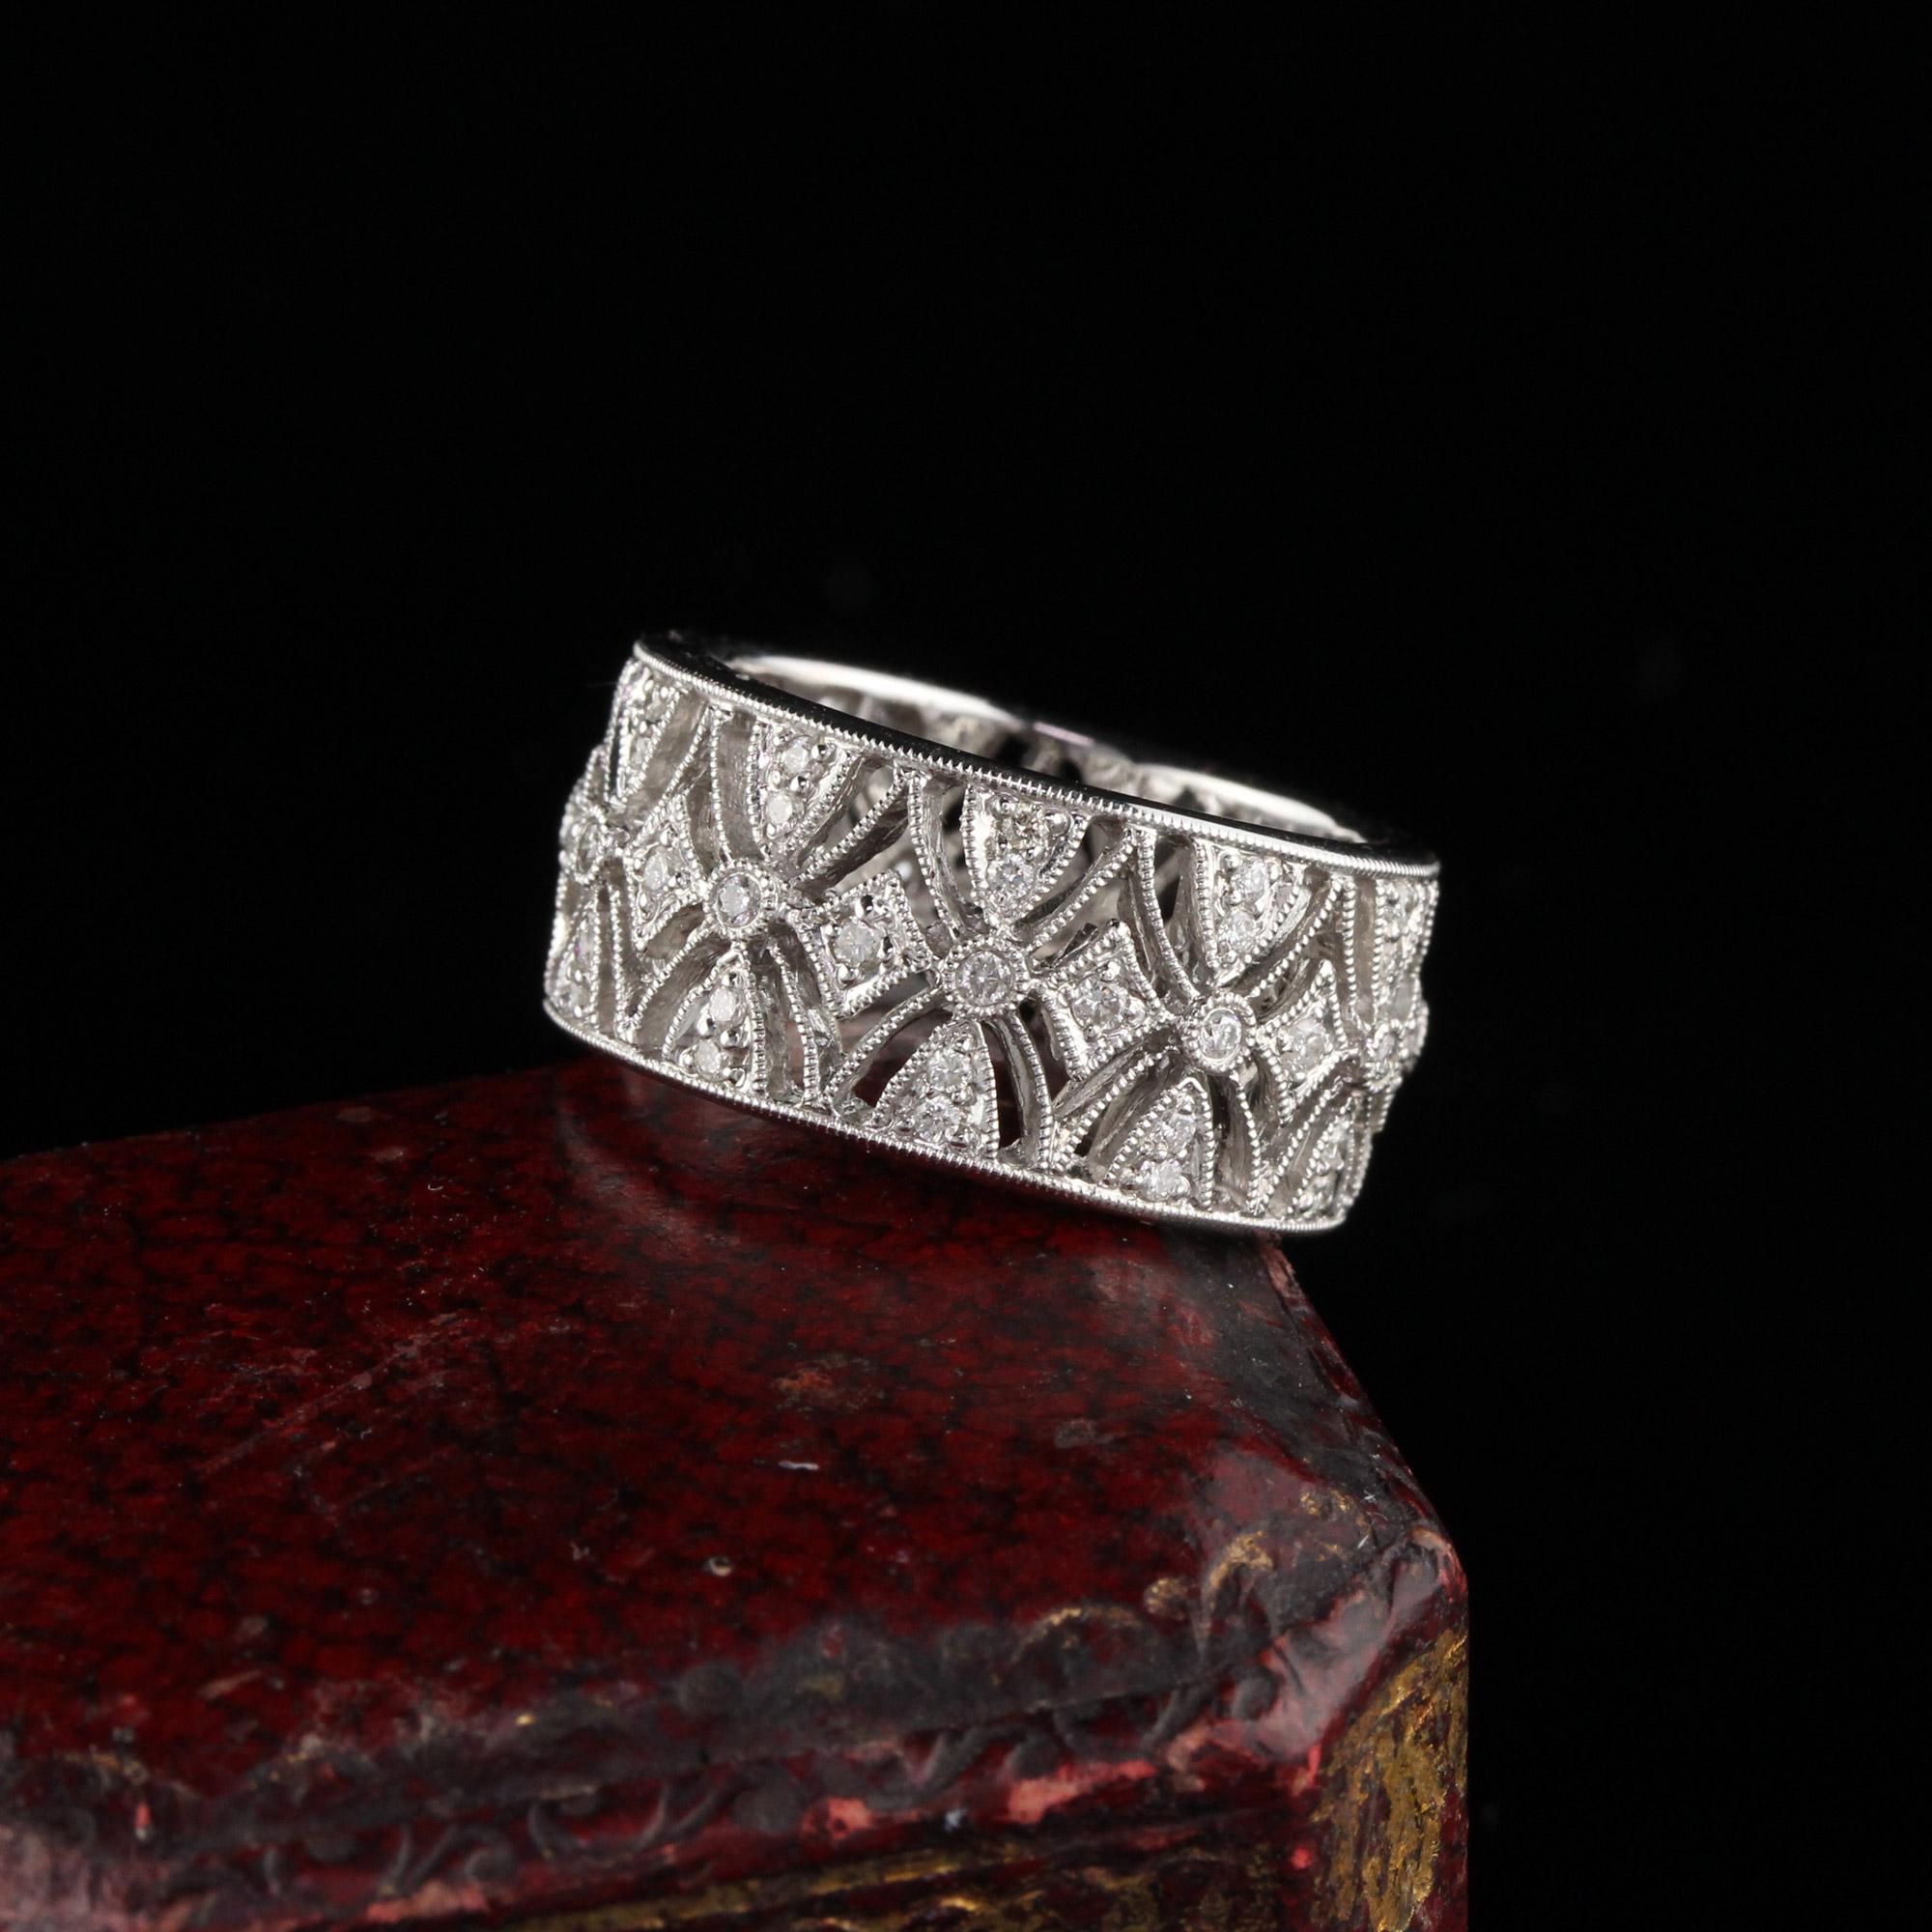 Dazzling diamond band with intricate design

Metal: White Gold

Weight: 10.5 Grams

Total Diamond Weight: Approximately 1 ct

Diamond Color: H

Diamond Clarity: SI1

Ring Size: 7

Measurements: 10.4 x 2.9 mm